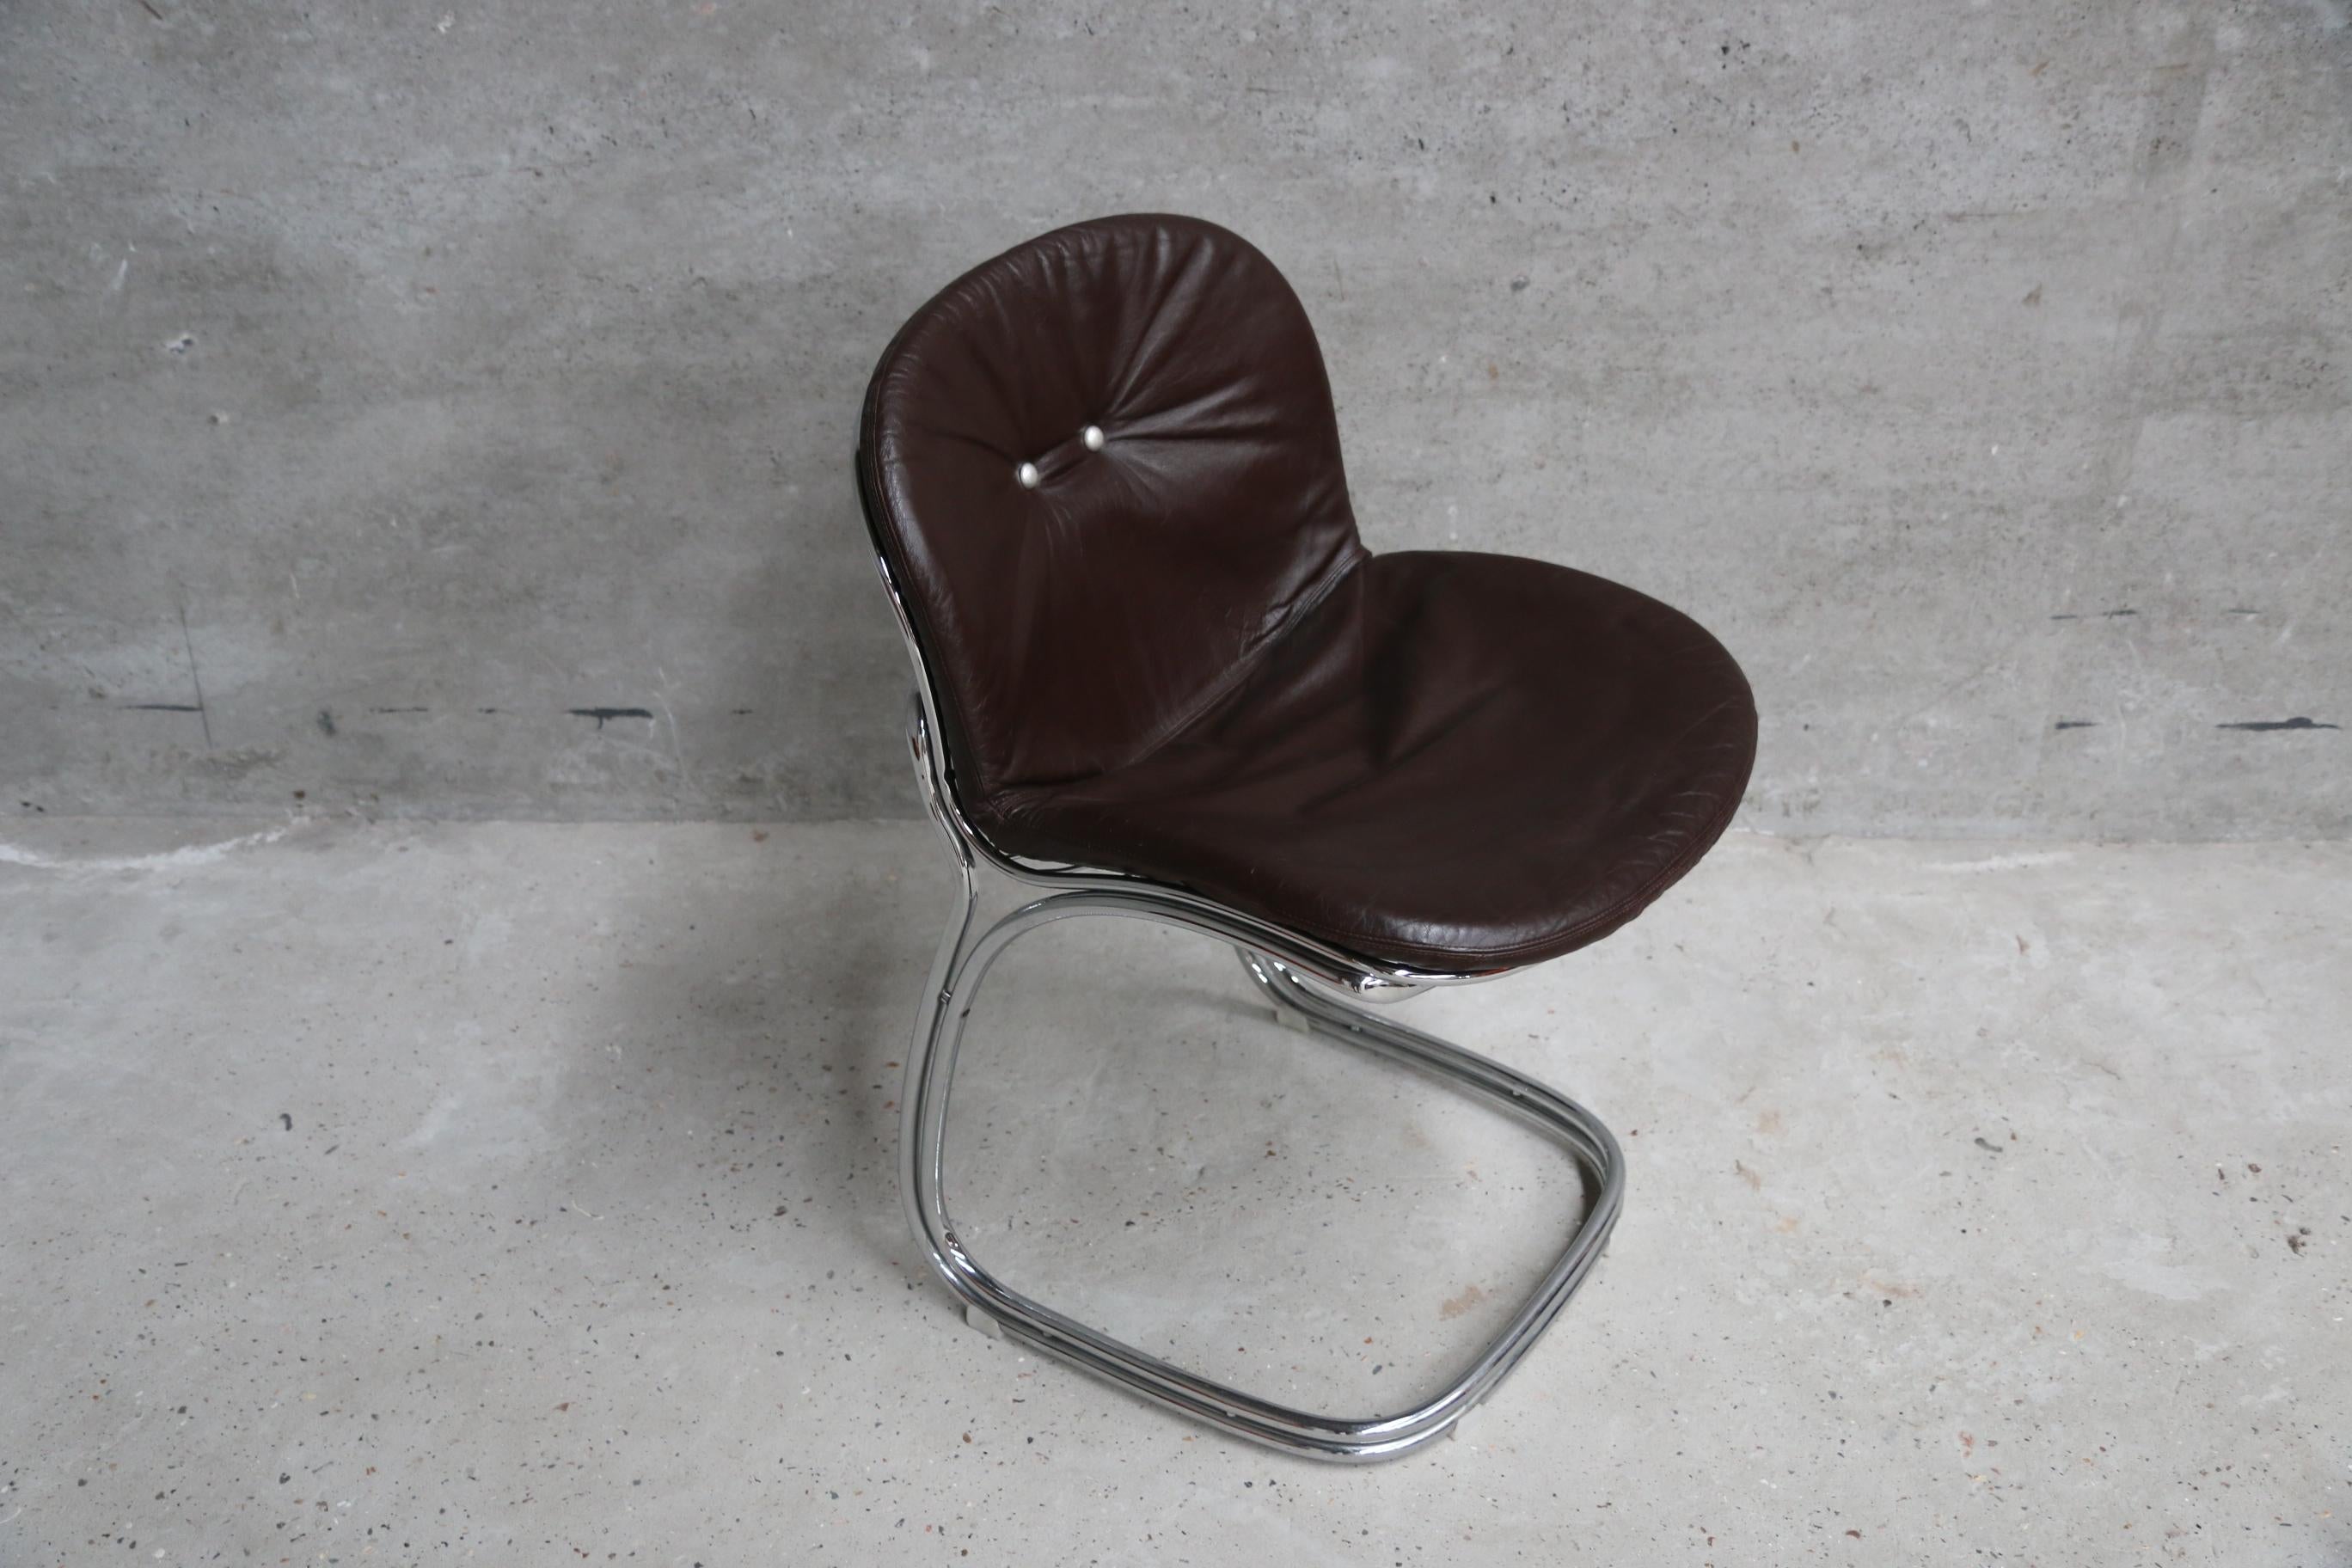 Set of 10 Sabrina Chair designed for RIMA by Gastone Rinaldi with original uphosltery in chocolate brown leather.

Gastone Rinaldi was born in Padua on 16 November 1920. In 1916 his father Mario had established RIMA, a company for the production